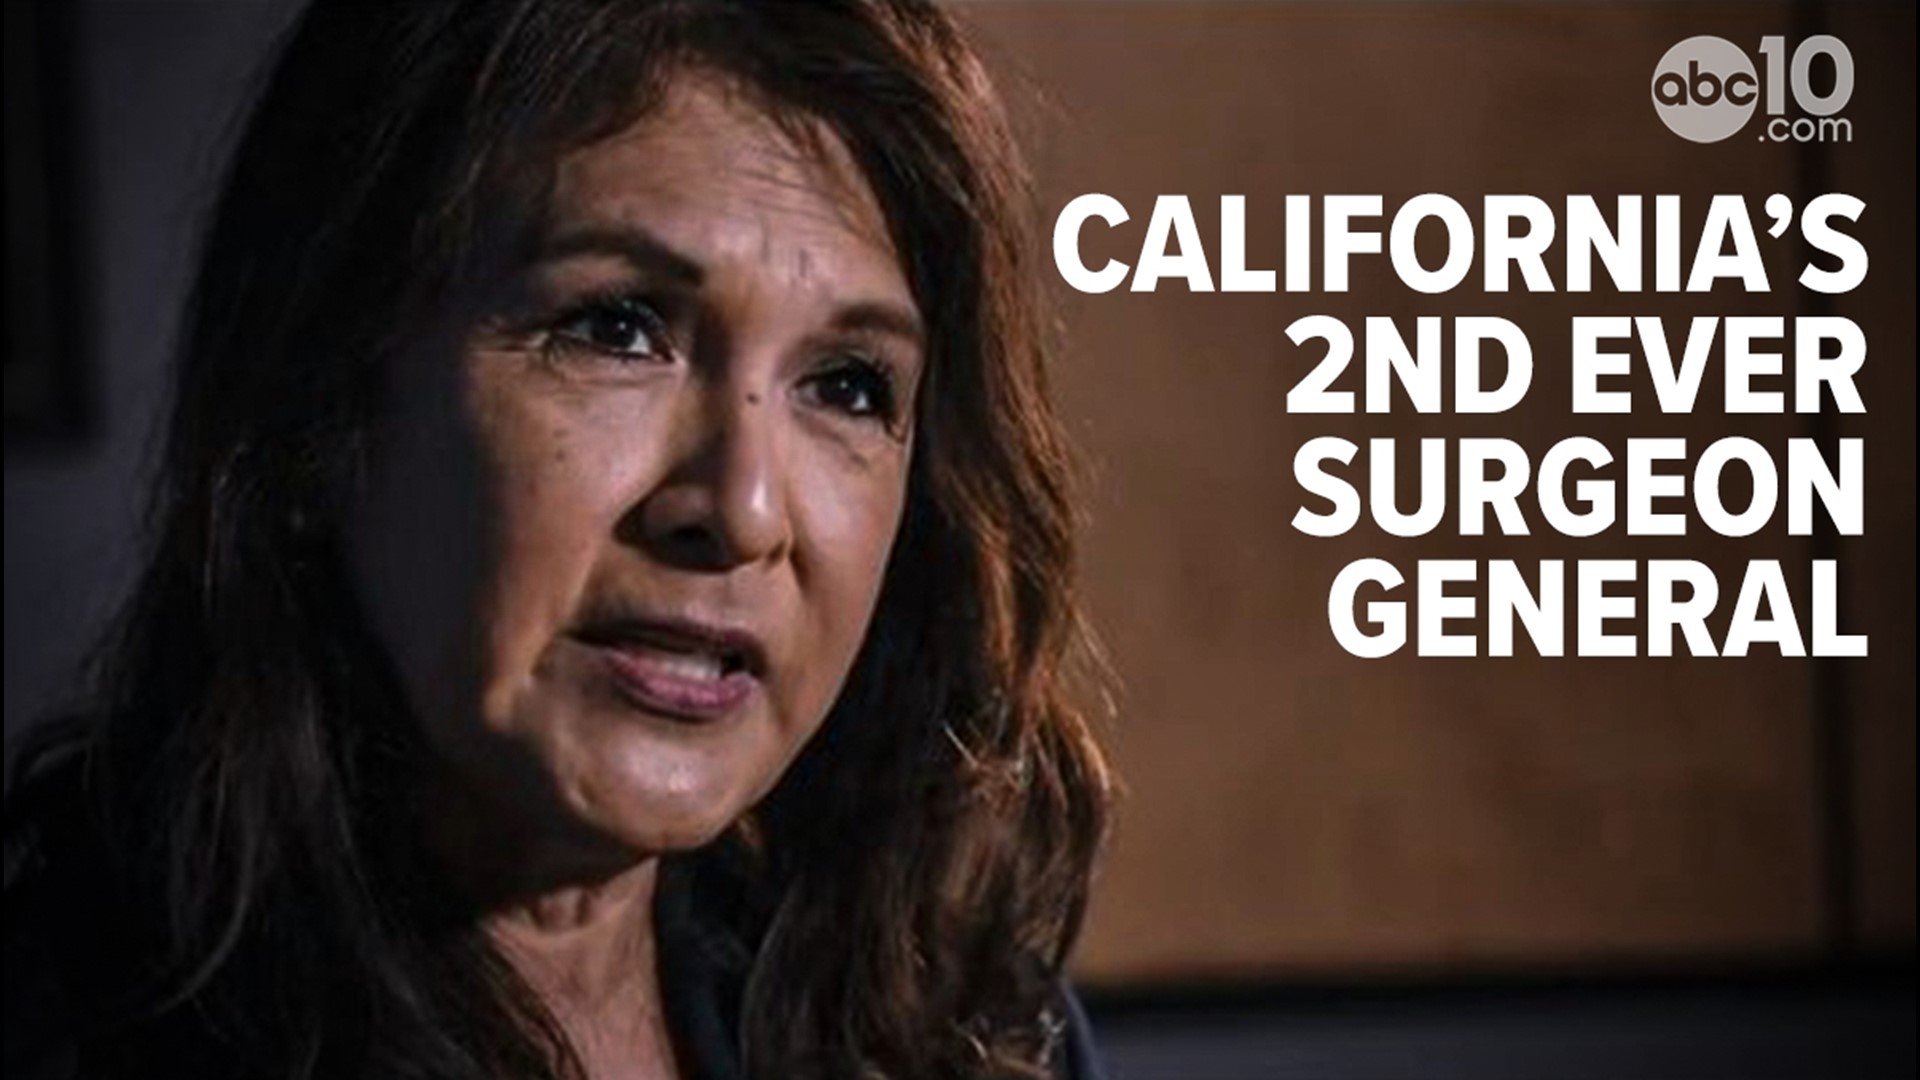 California’s State of Emergency is set to end on Feb. 28, 2023, and our political reporter Morgan Rynor sat down with Dr. Diana Ramos to get more information.